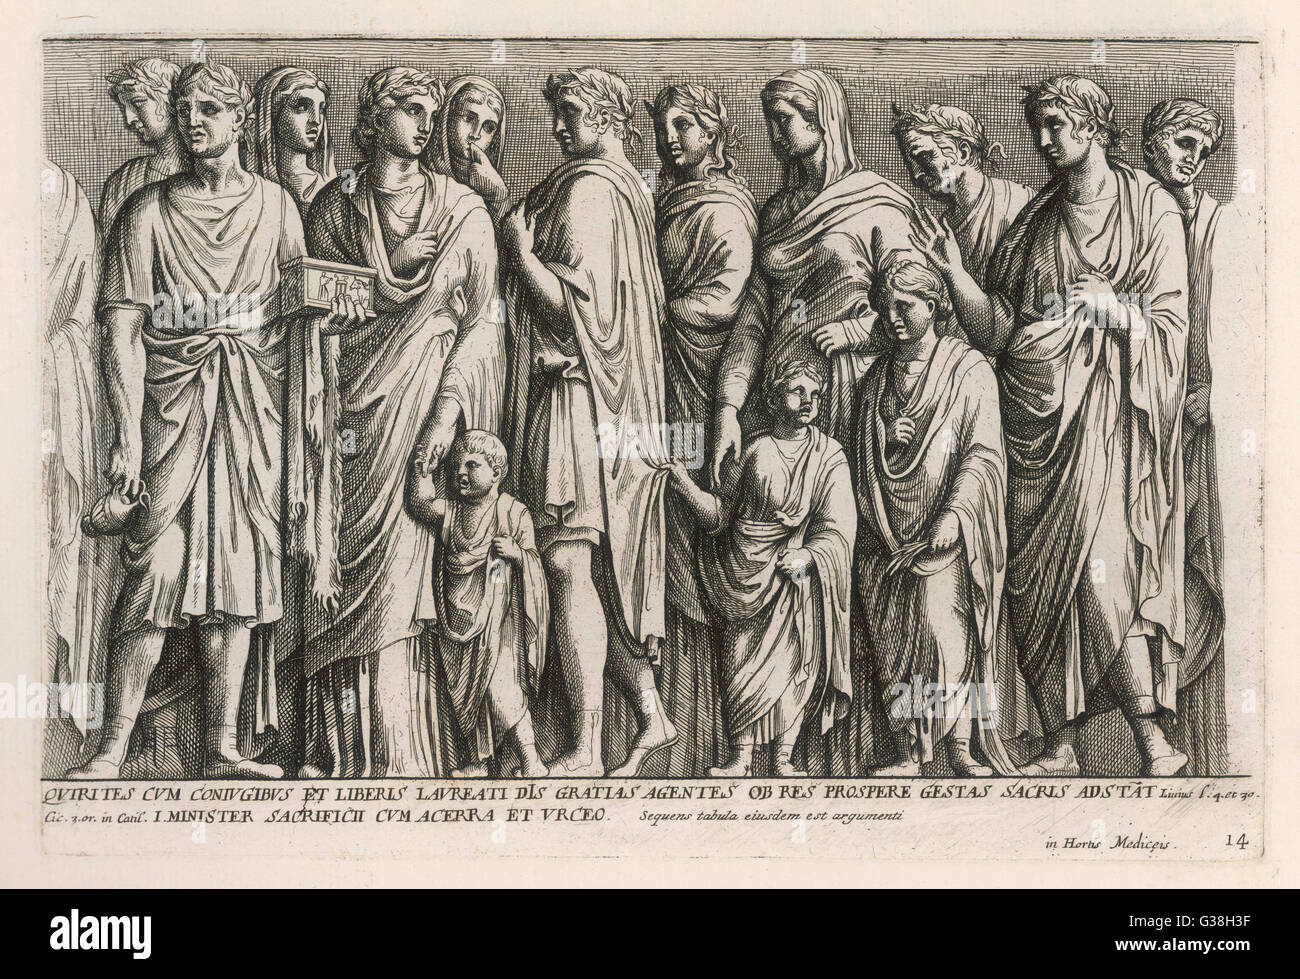 A group of Roman citizens.          Date: ANCIENT ROME Stock Photo